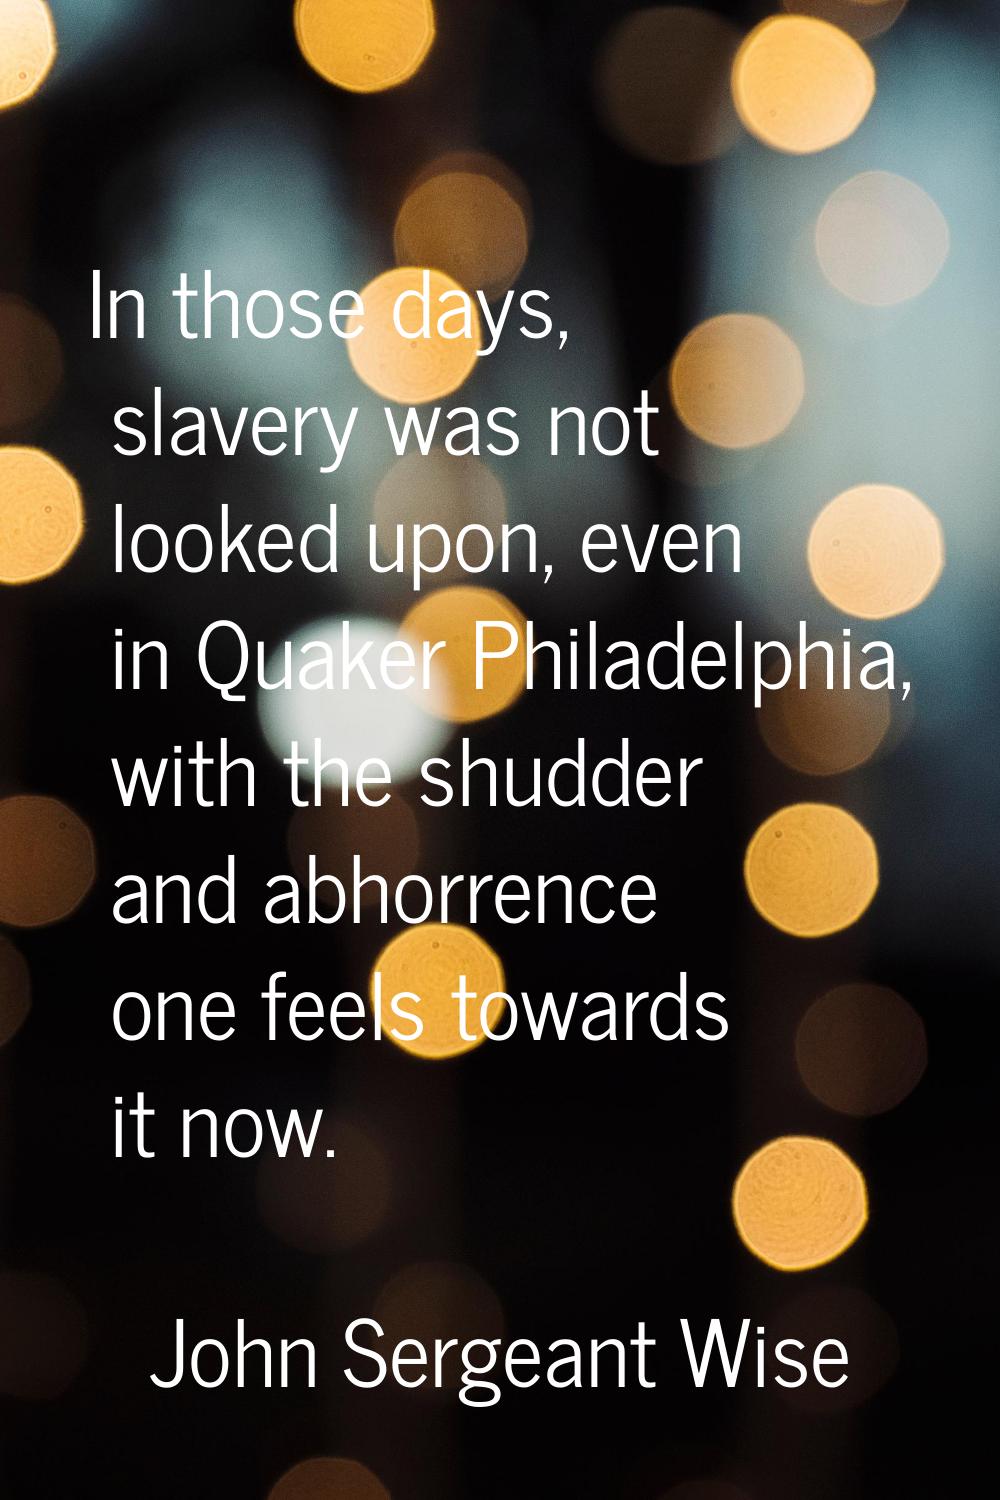 In those days, slavery was not looked upon, even in Quaker Philadelphia, with the shudder and abhor